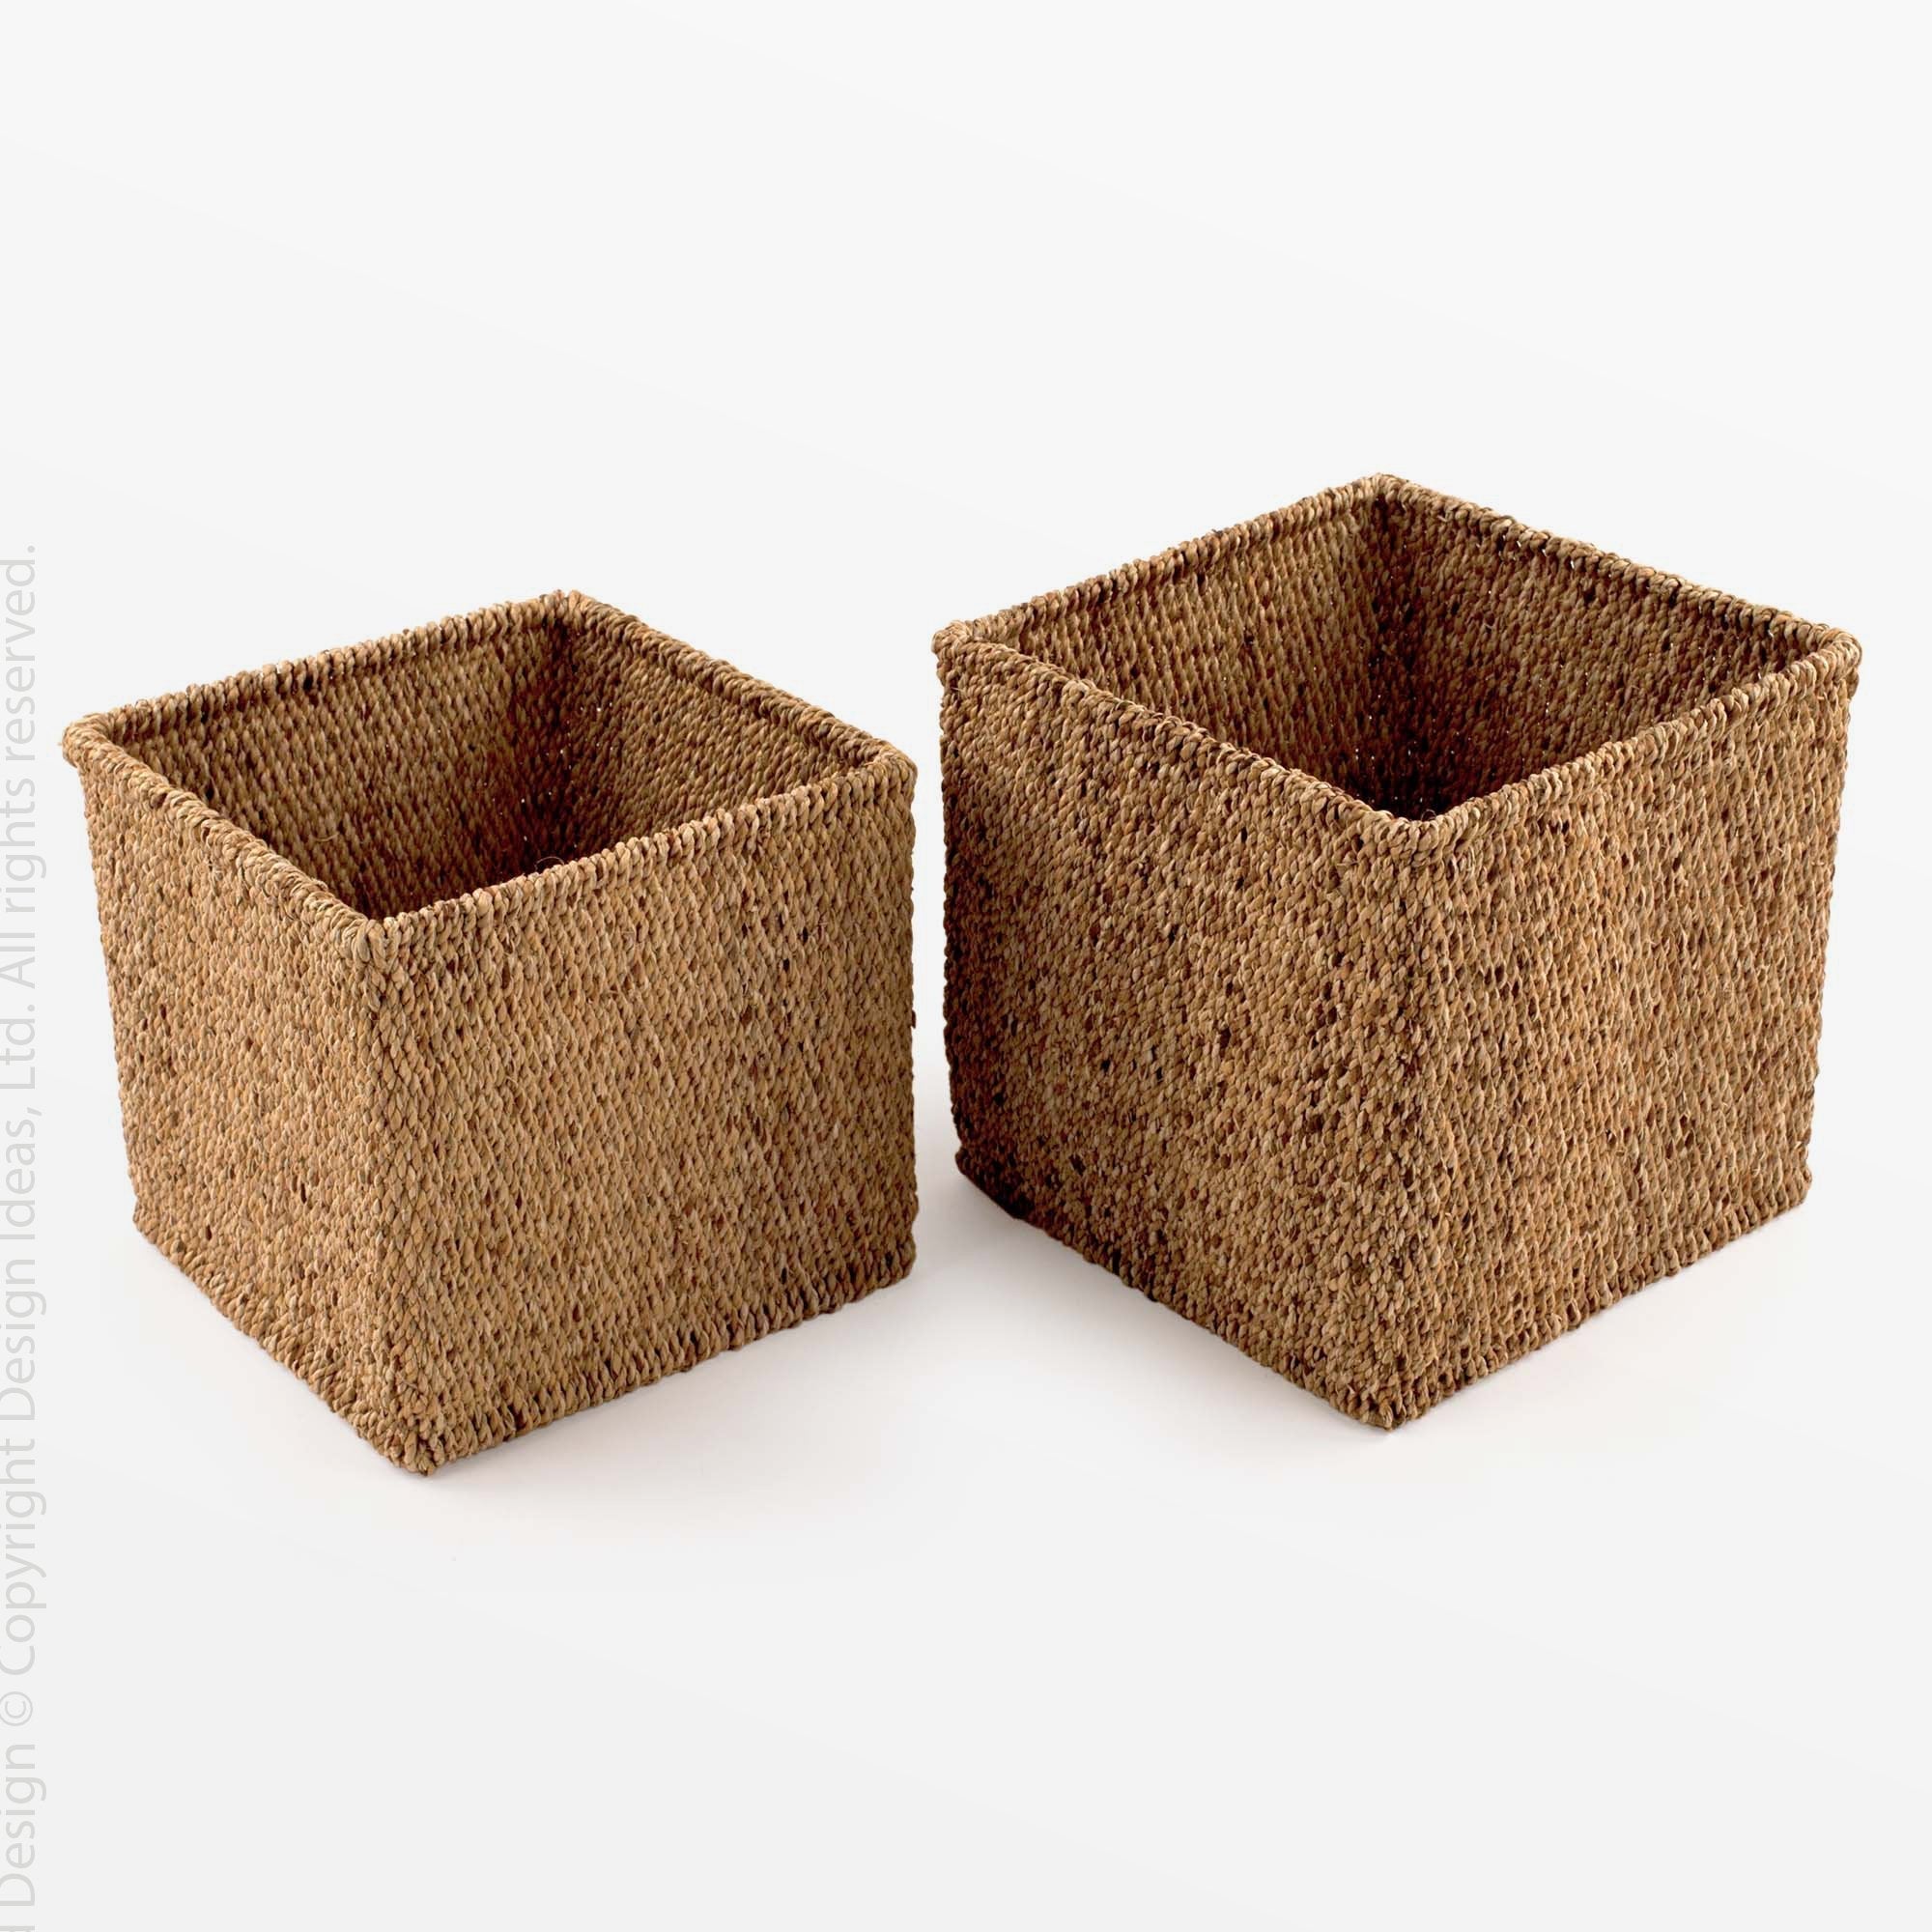 Yari™ baskets (set of 2) - Natural | Image 3 | Premium Basket from the Water Hyacinth collection | made with Water Hyacinth for long lasting use | texxture